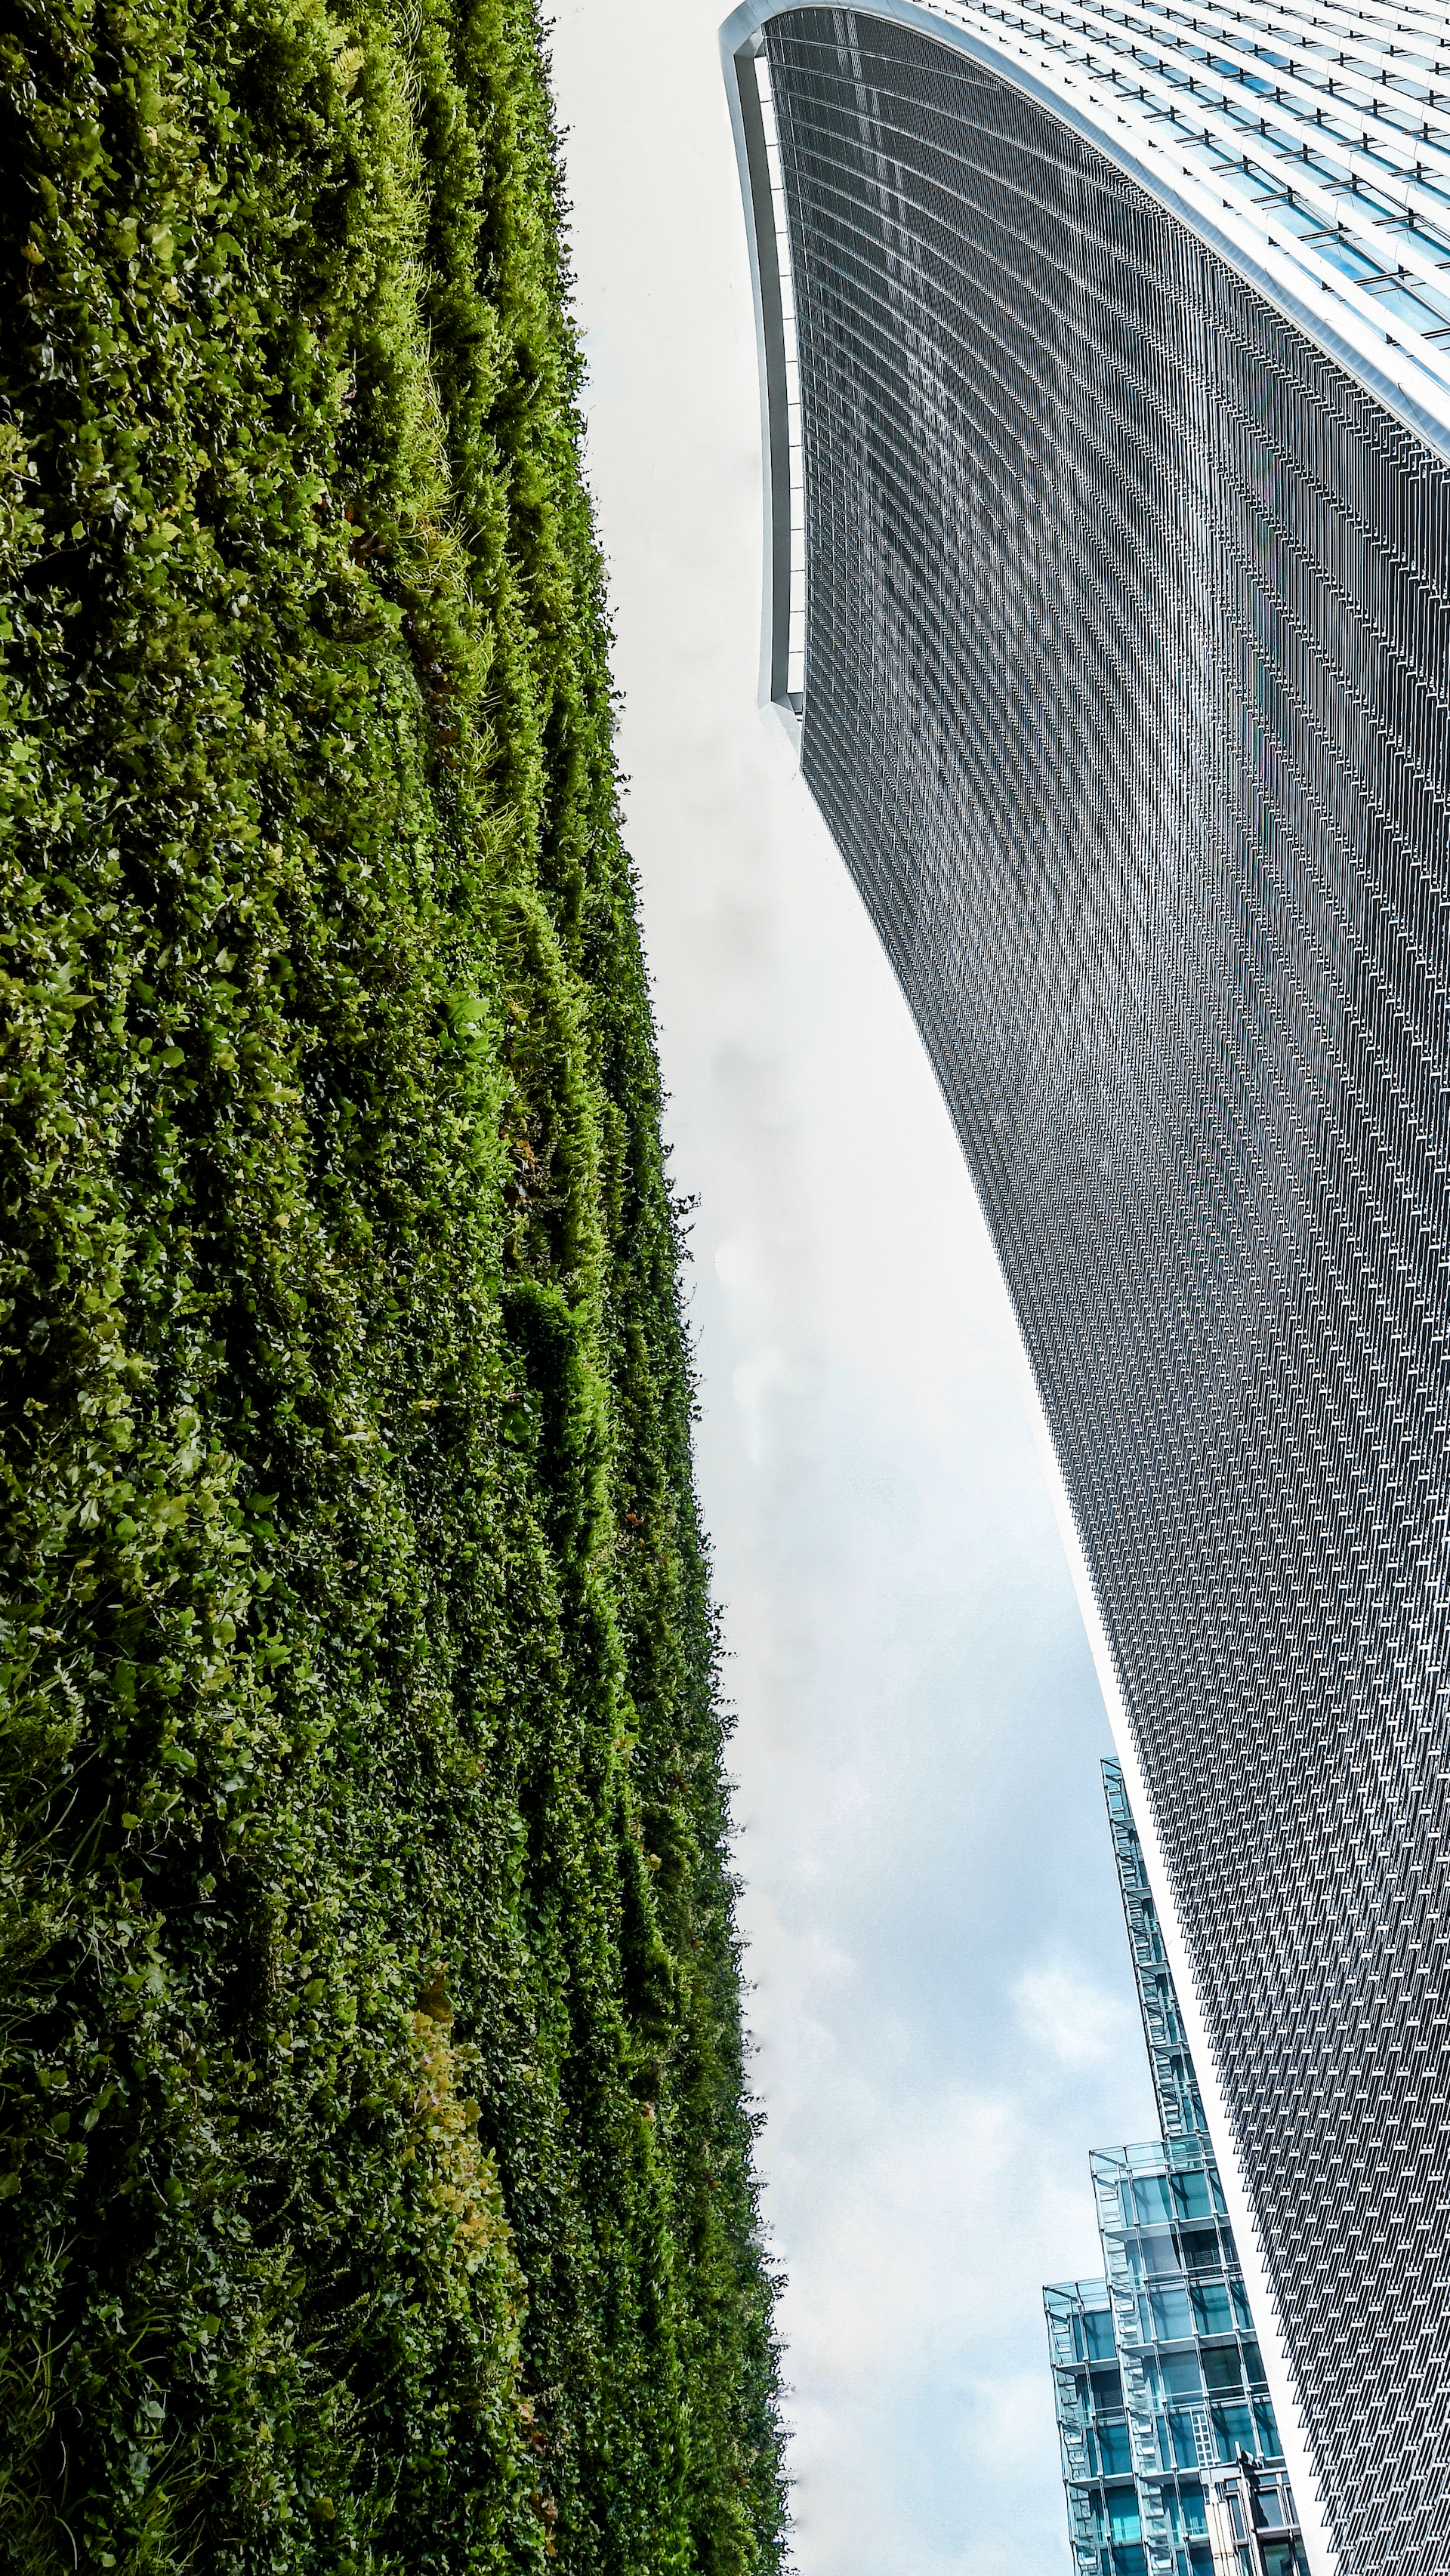 20 Fenchurch Street Building Facing Green Hedge Wall In London, UK